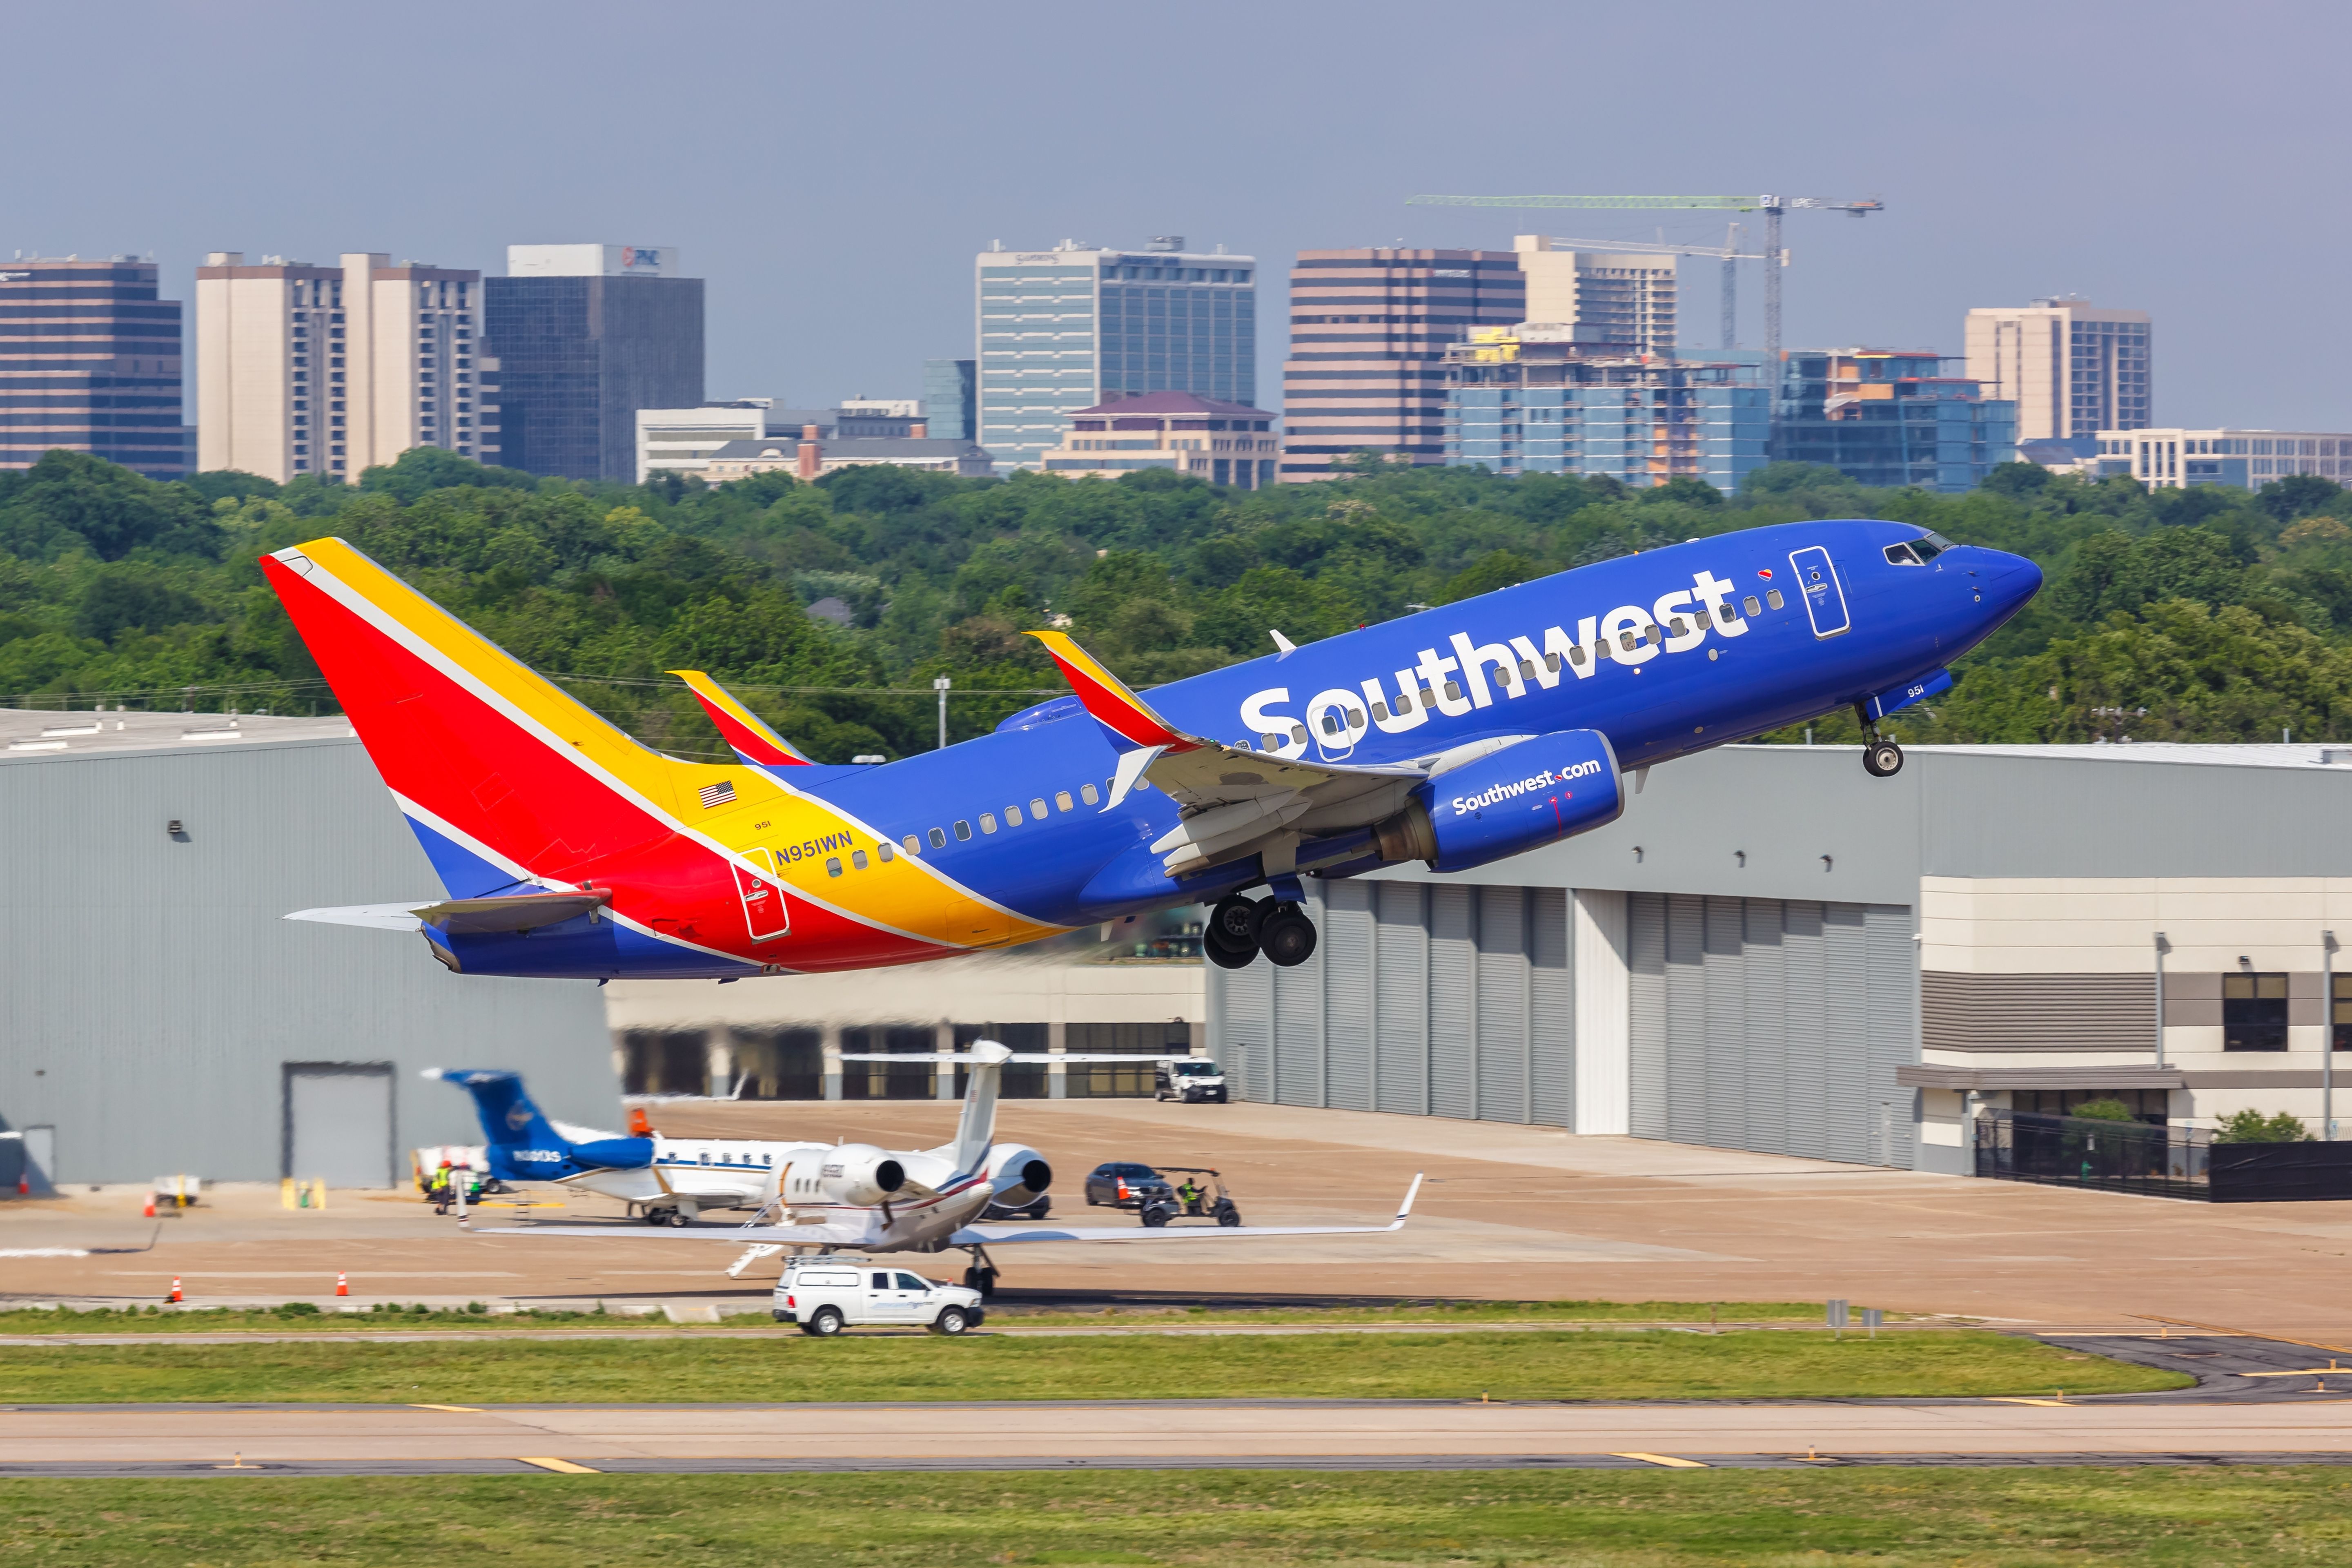 A Southwest aircraft departing from Dallas Love Field